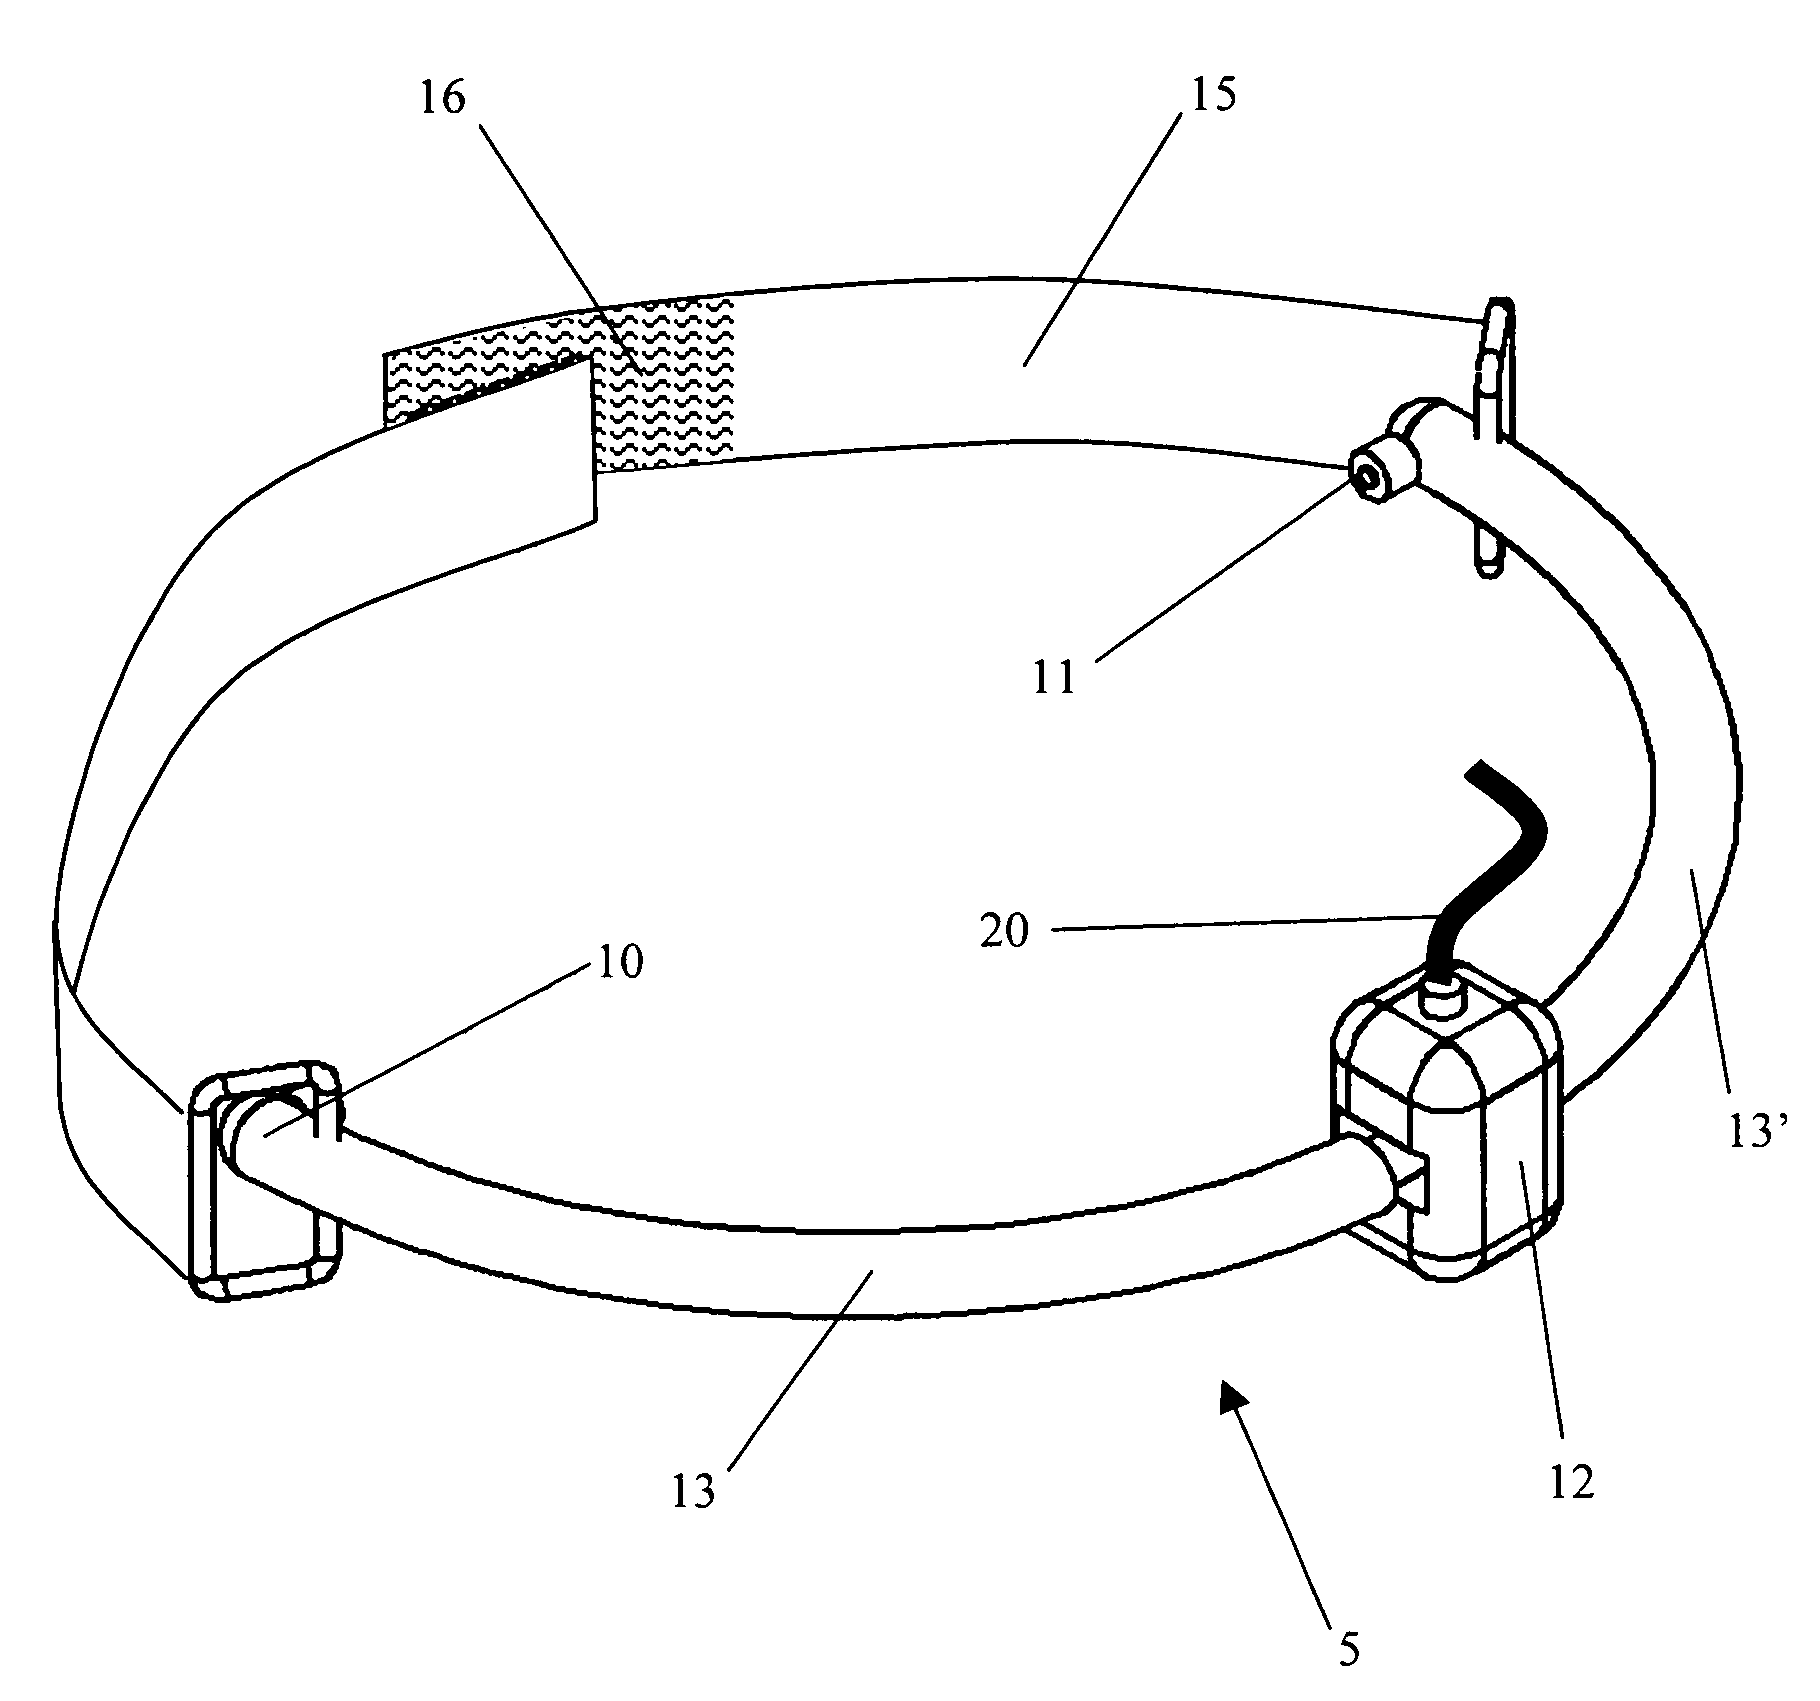 Ultrasonic water content monitor and methods for monitoring tissue hydration